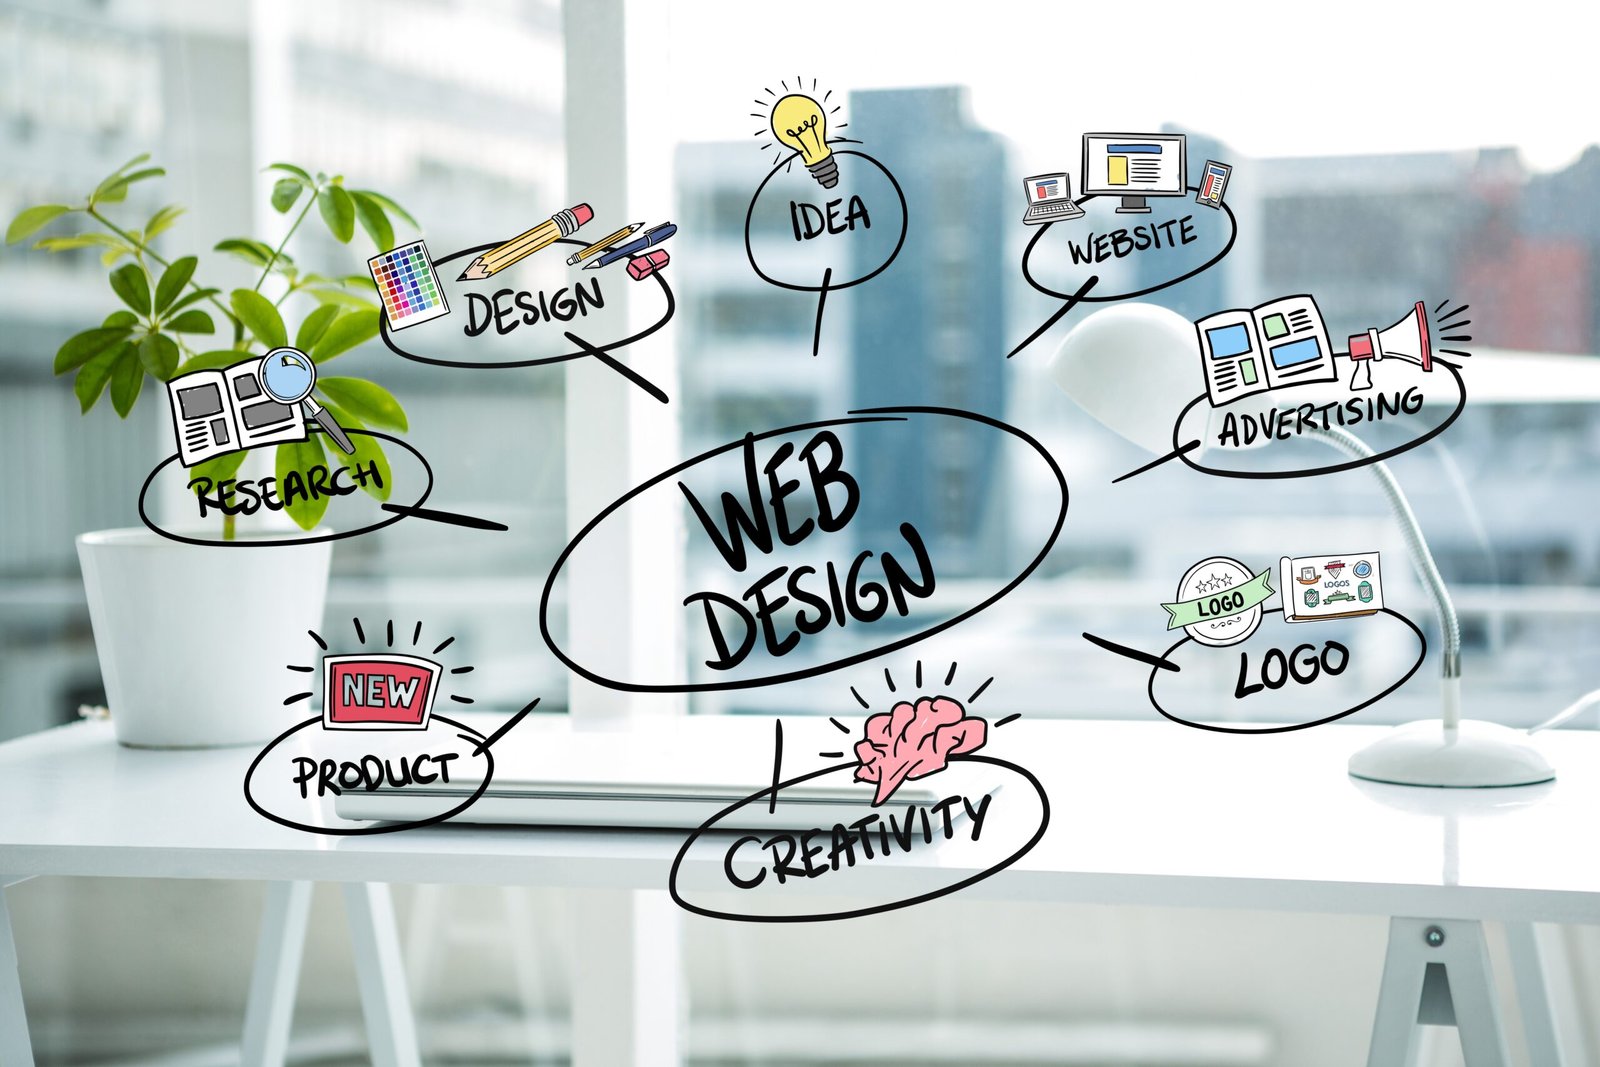 Web Design - Turn Your Ideas into Reality with Kaaeotech